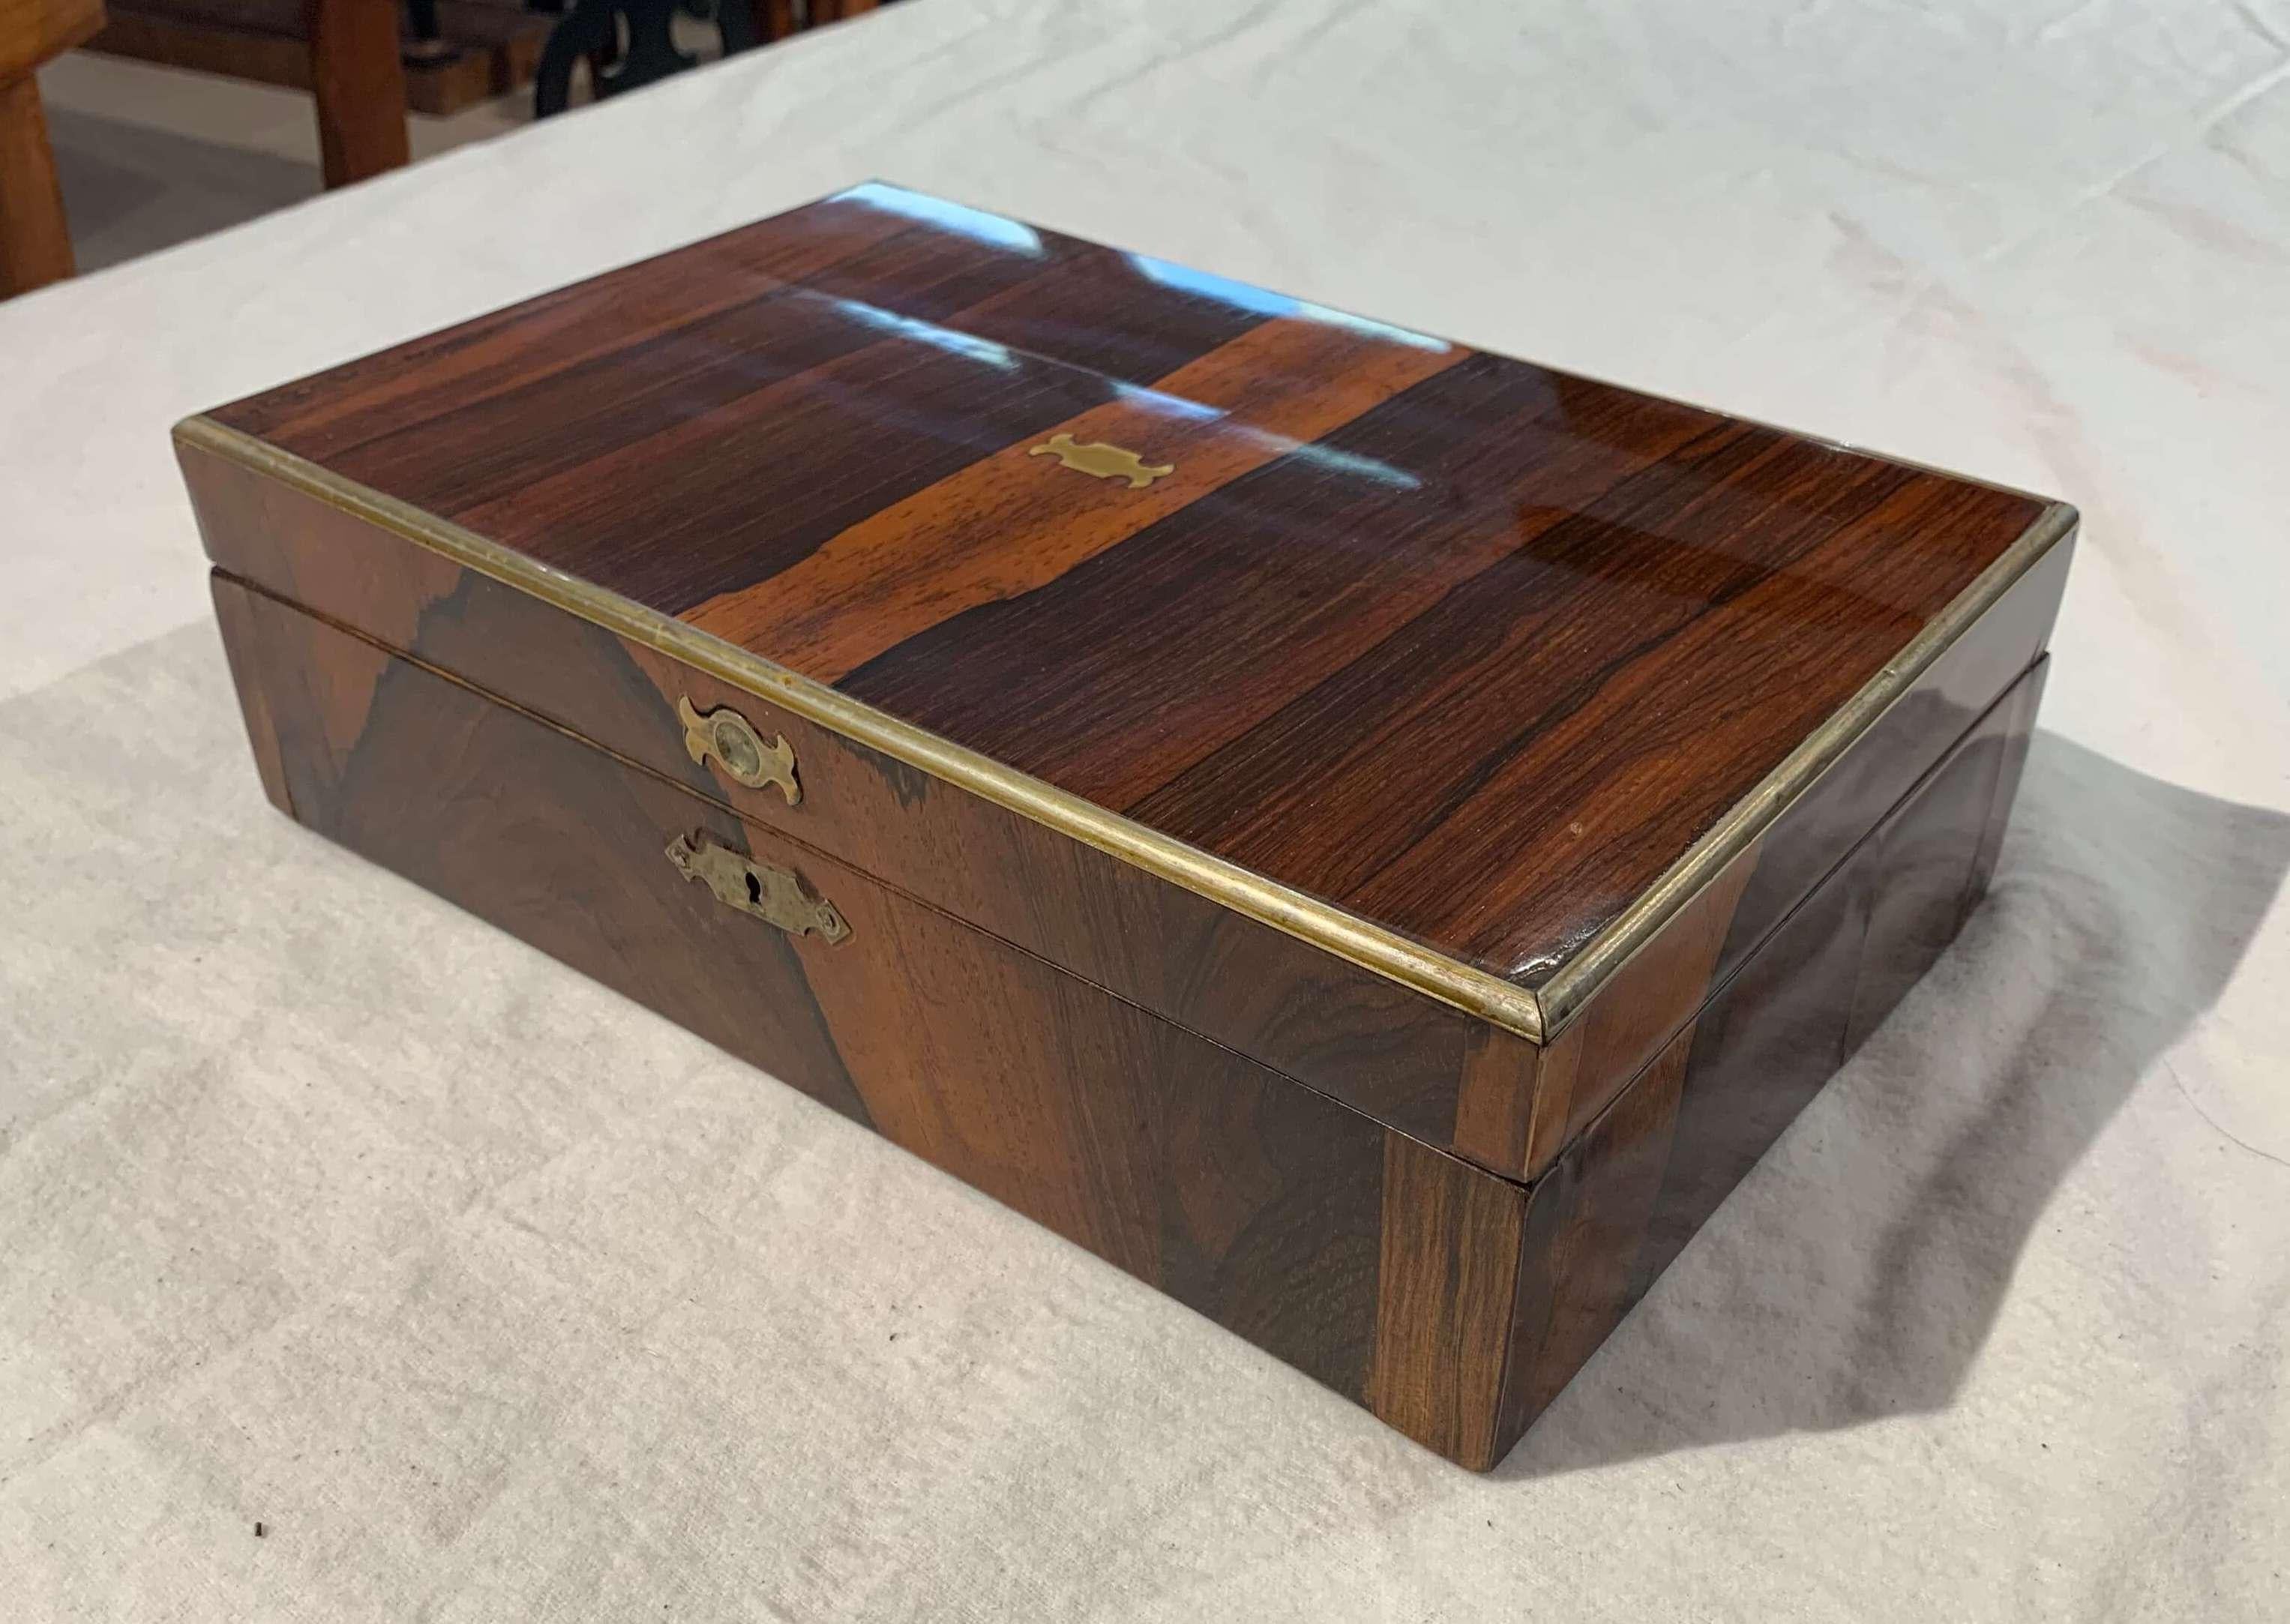 Neoclassical Biedermeie box, rosewood veneer, brass inlays, England, circa 1830

Beautiful rosewood/palisander veneered, French polished. Brass trims around the upper edge and brass fittings. Inside softwood (Spruce) painted.